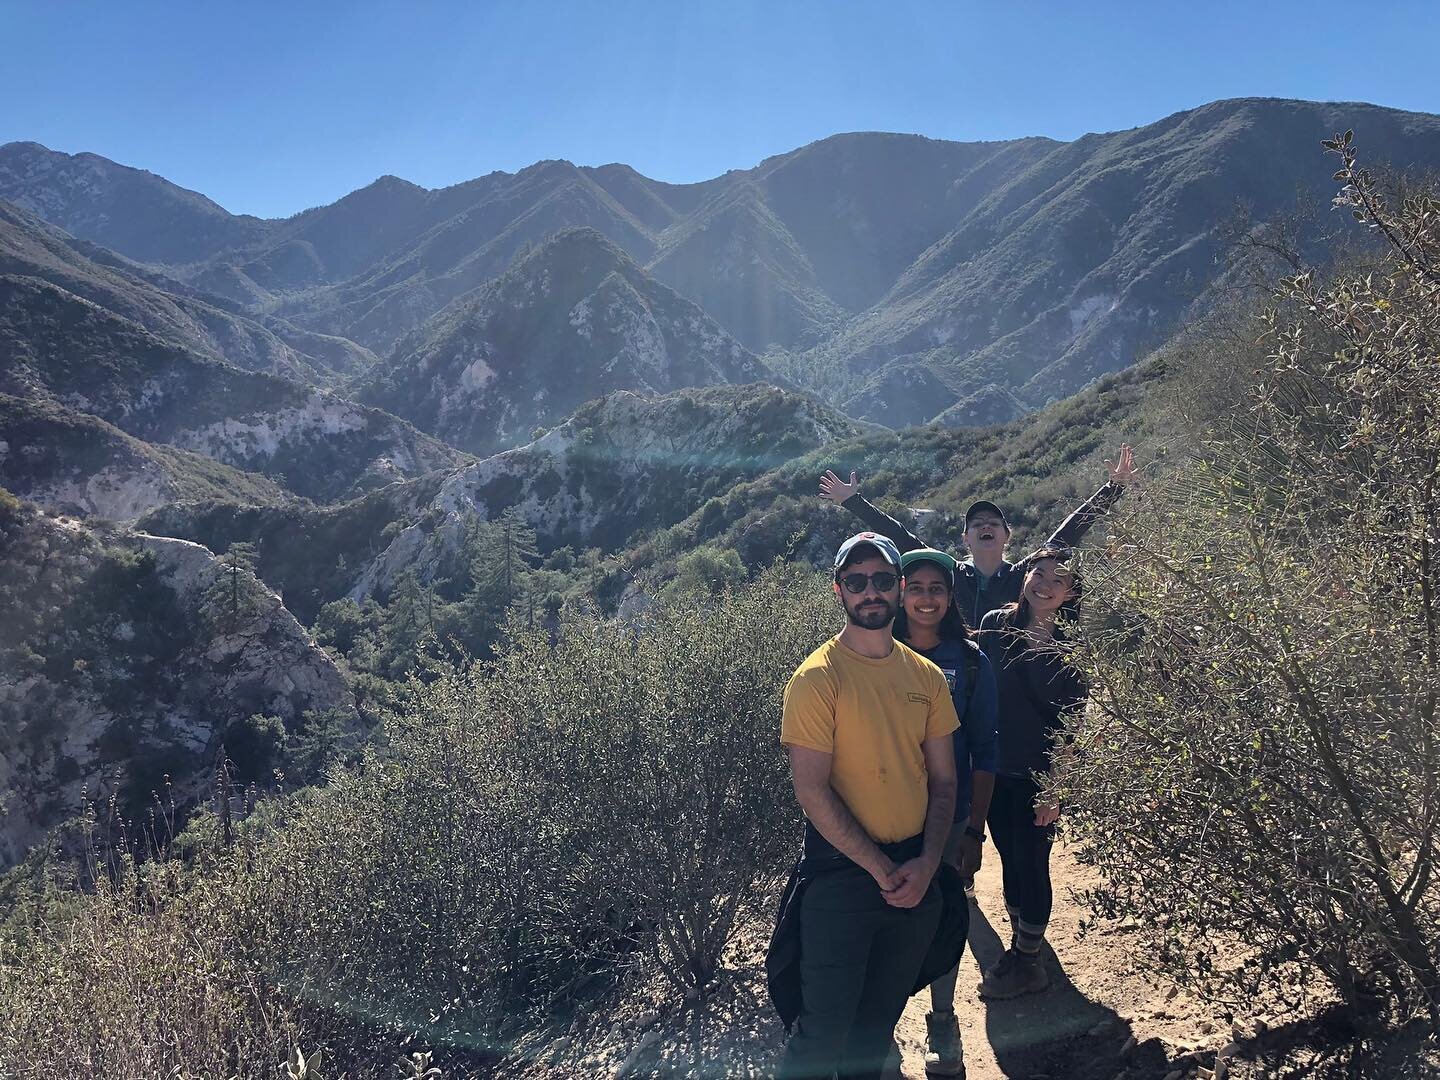 Our PGY1s and PGY2s headed into Angeles National Forest for some hiking this weekend! It was all downhill from here (but unfortunately all uphill on the way back).